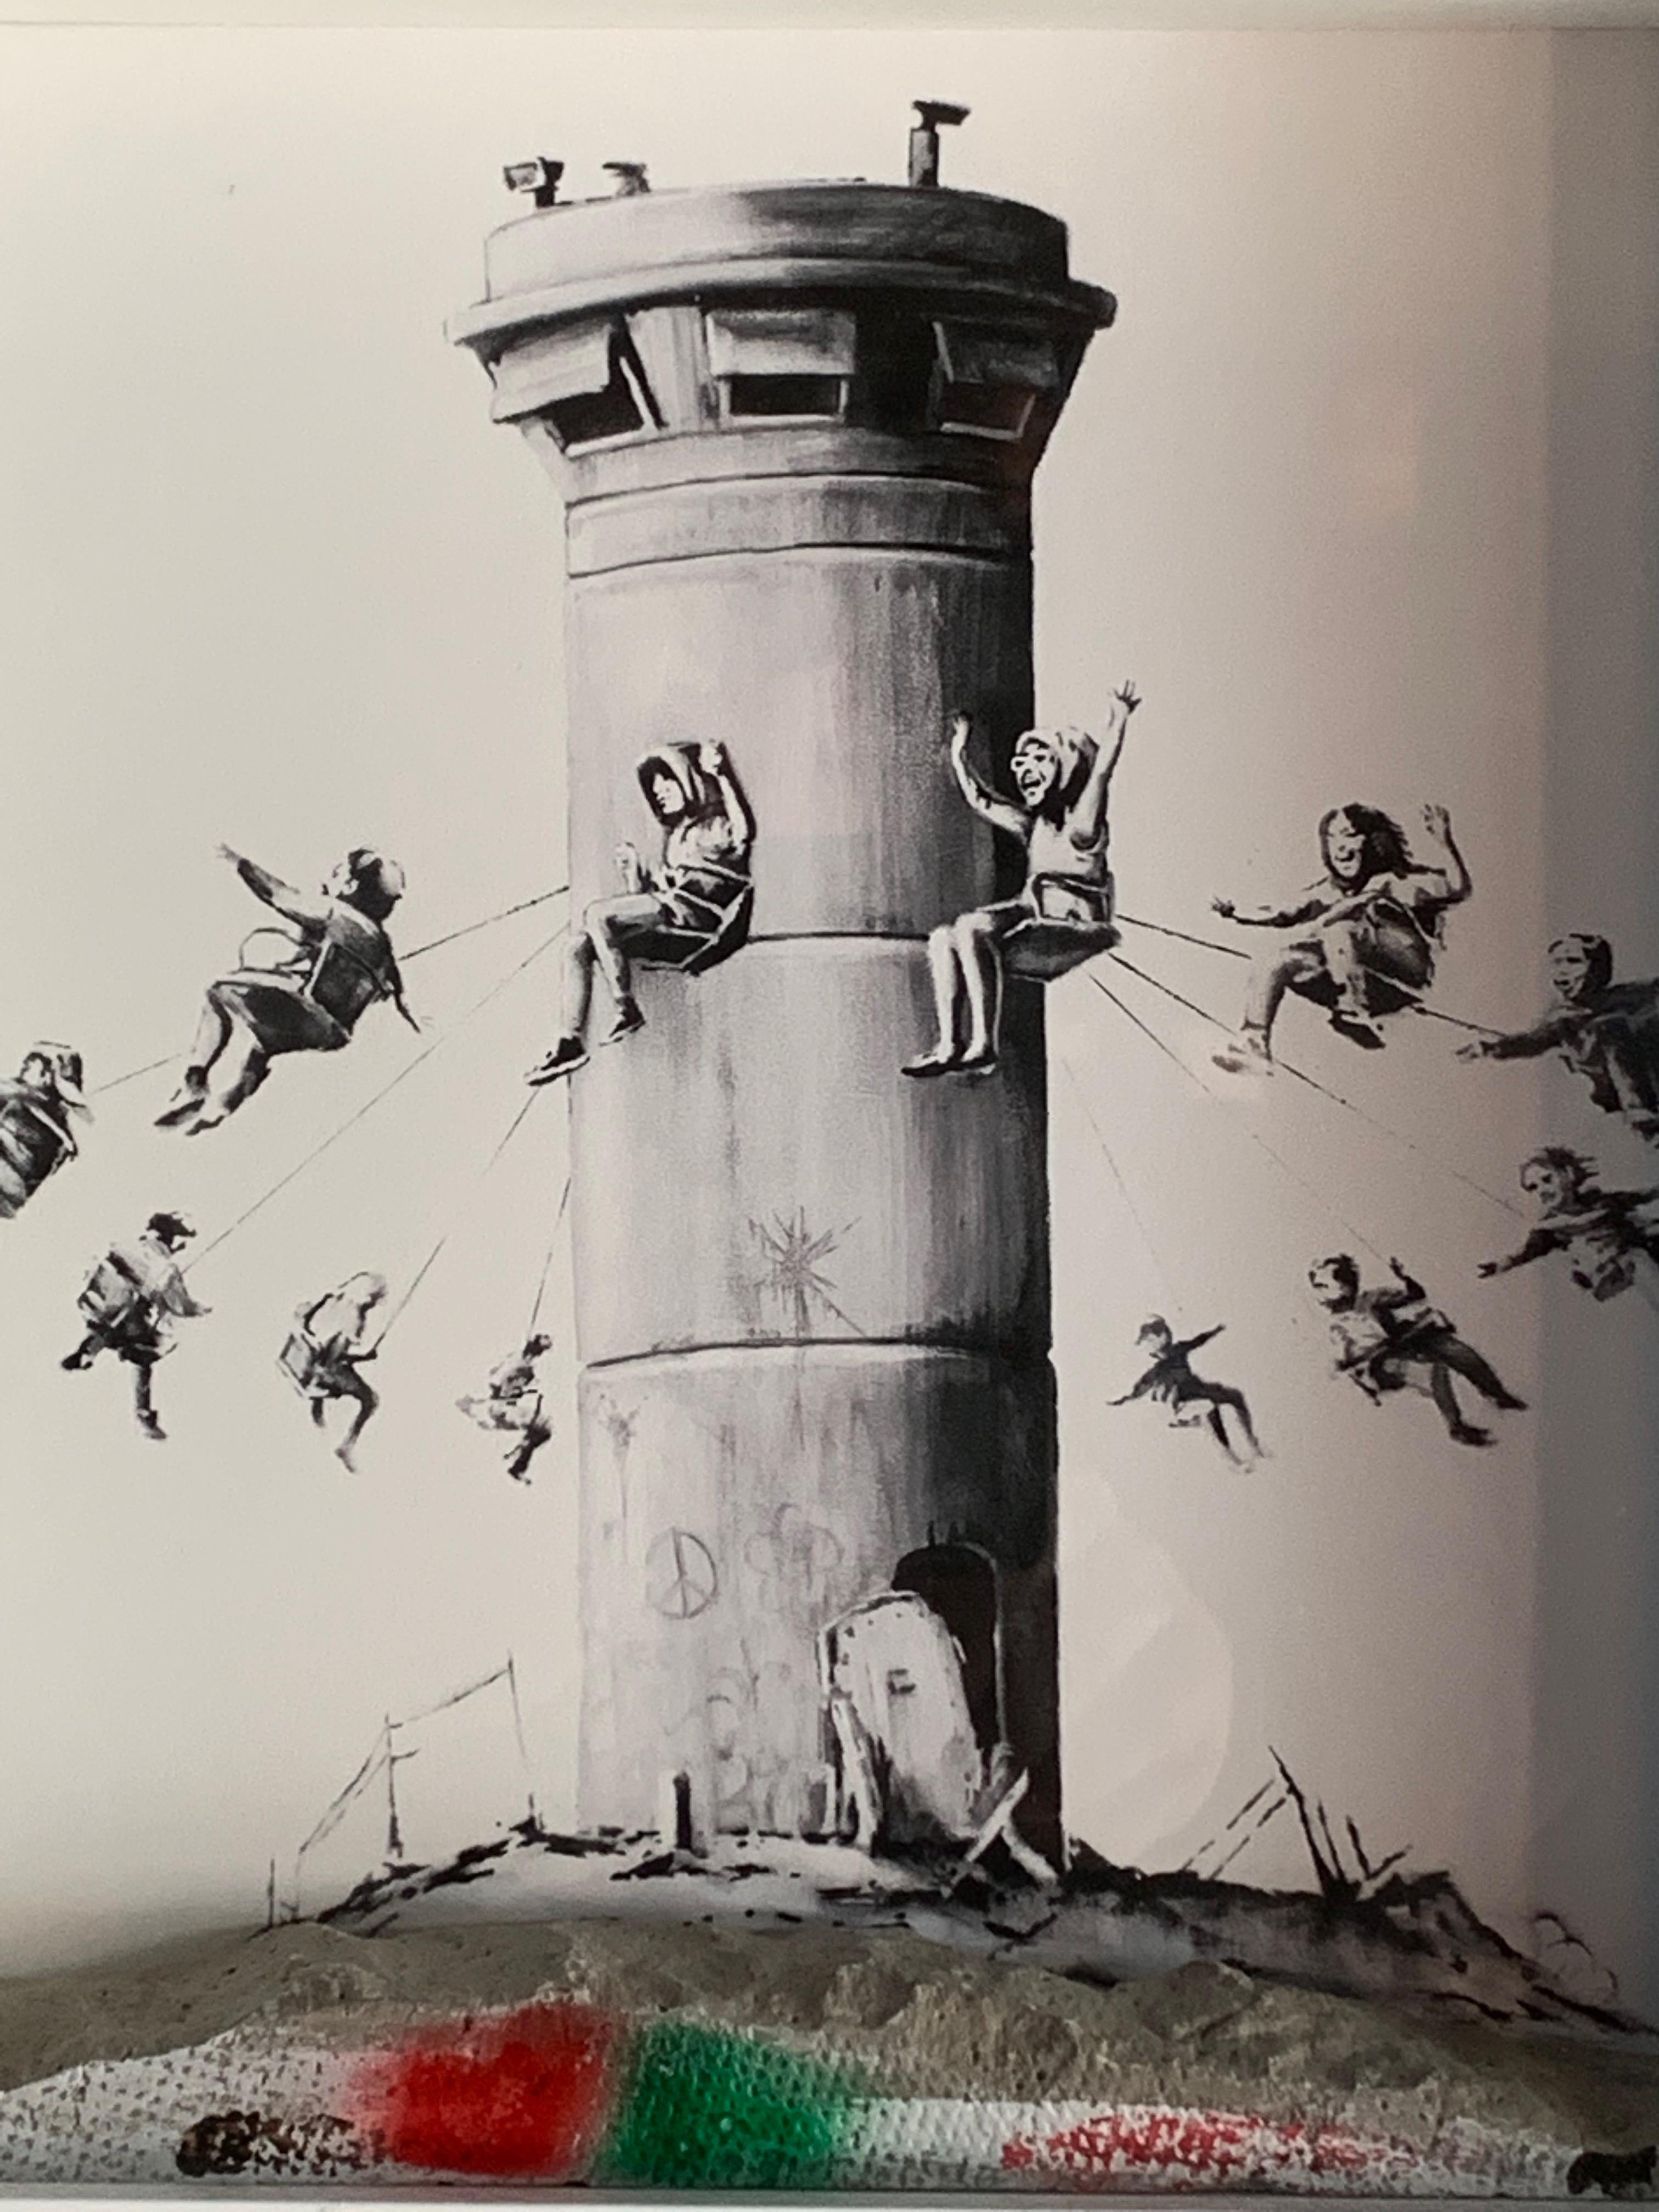 Banksy The Walled Off Hotel Box Set Banksy (British, b.1974)

Banksy (British, b.1974) The Walled Off Hotel Box Set,  Depicts the watch tower as fairground swing contained within the frame is a concrete base from the separation barrier in the West